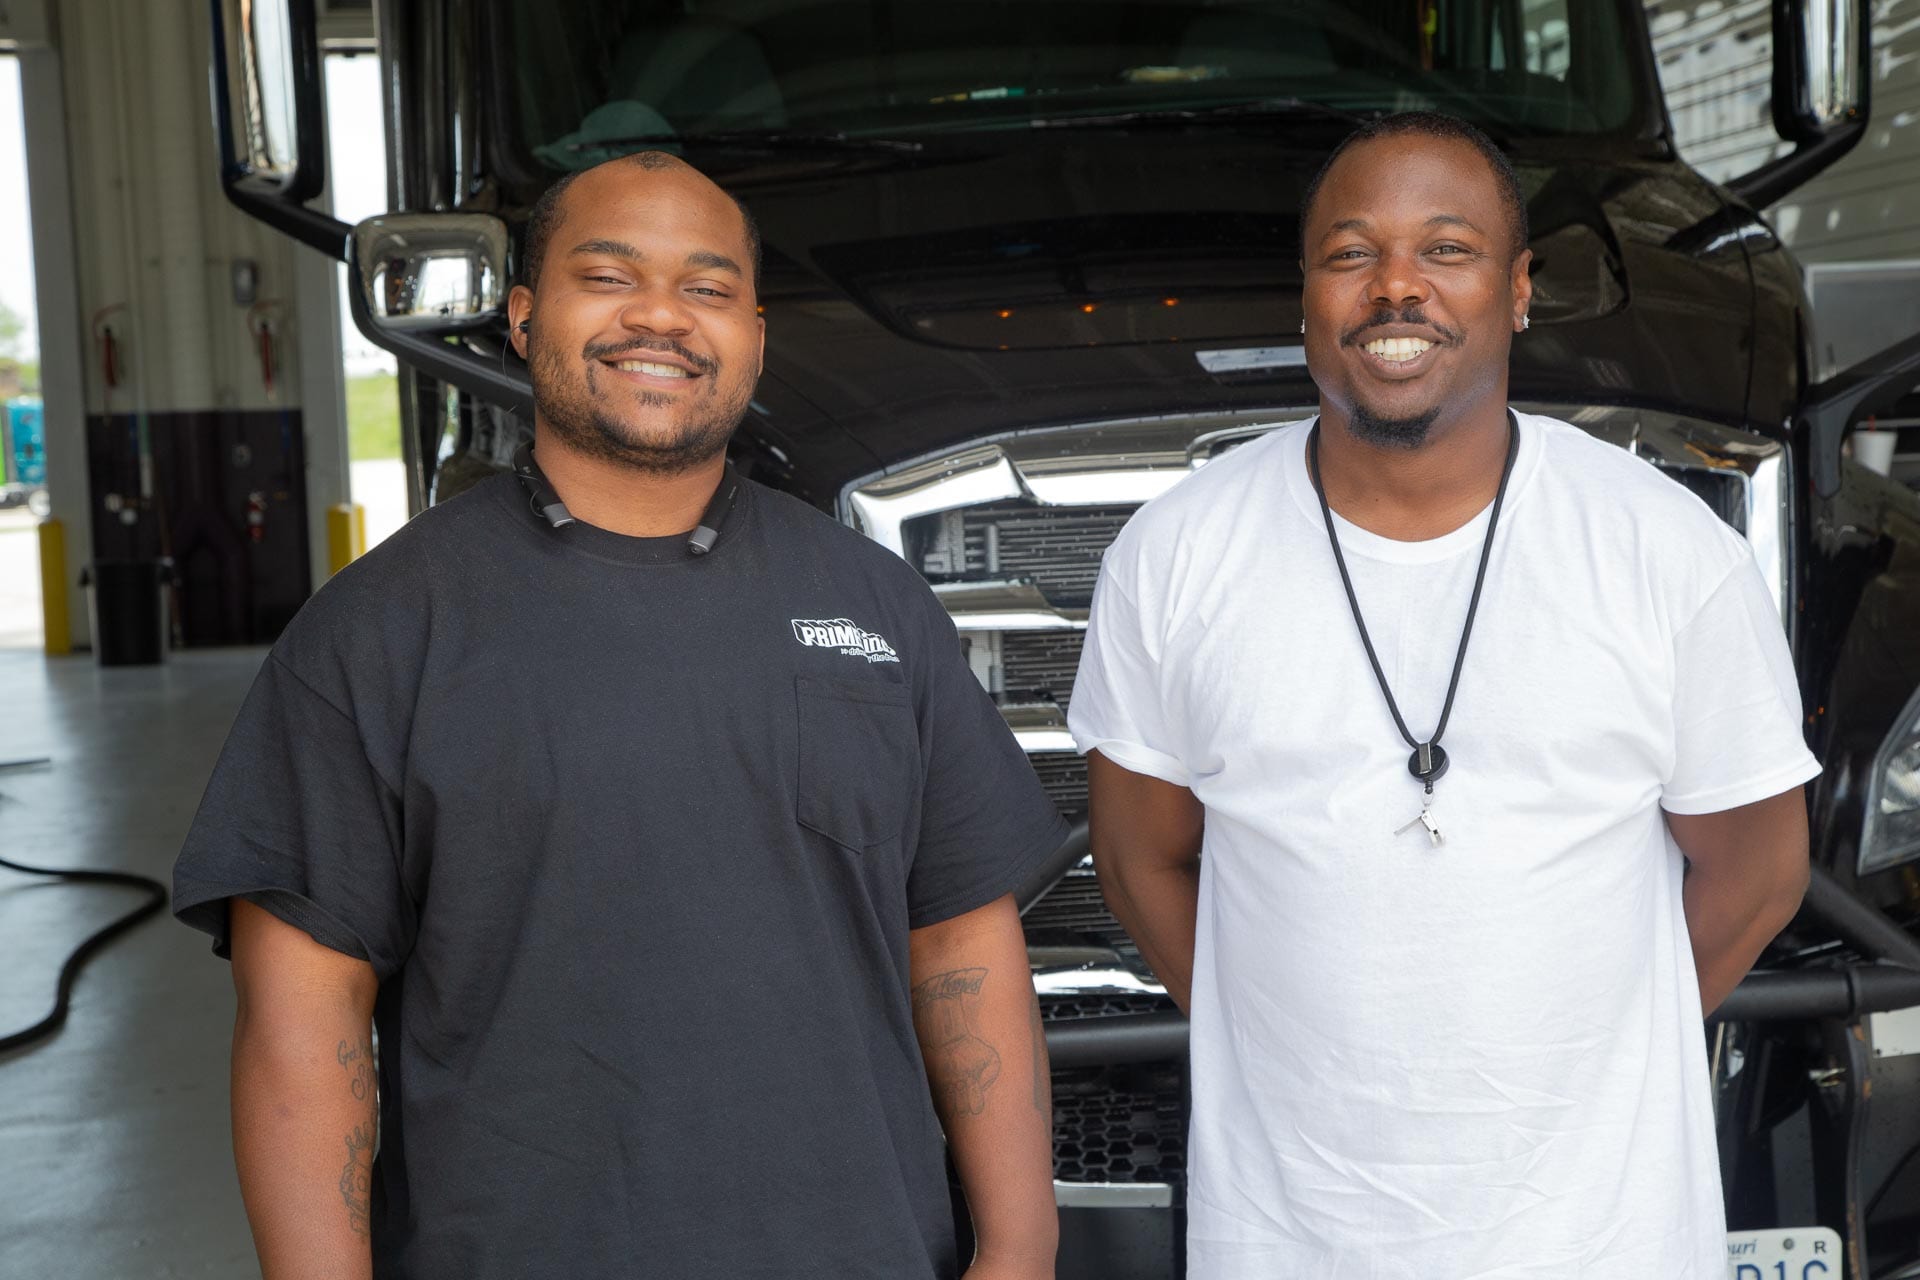 Two Prime truck drivers posing for a picture in front of a black Freightliner semi-truck.